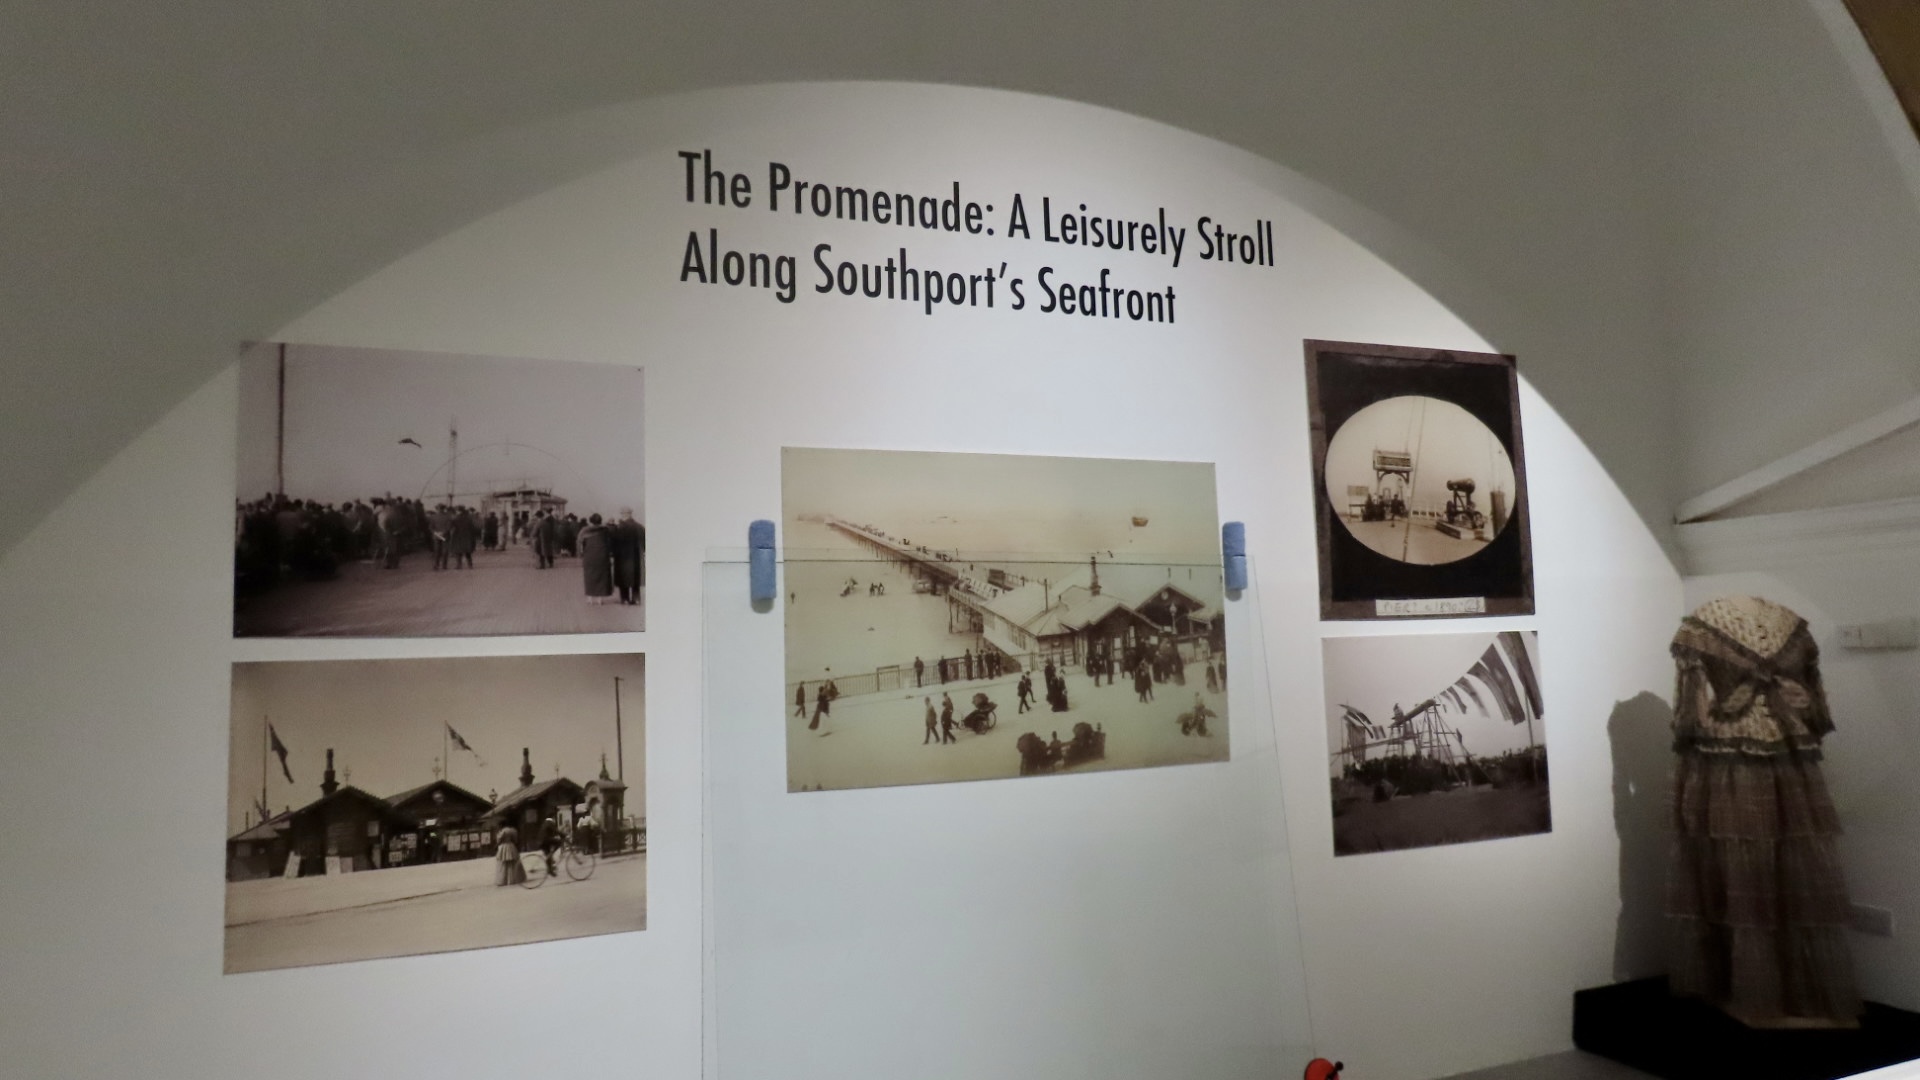 The Promenade: A Leisurely Stroll Along Southport's Seafront is at The Atkinson, Lord Street, Southport, 14 January - 11 March 2023